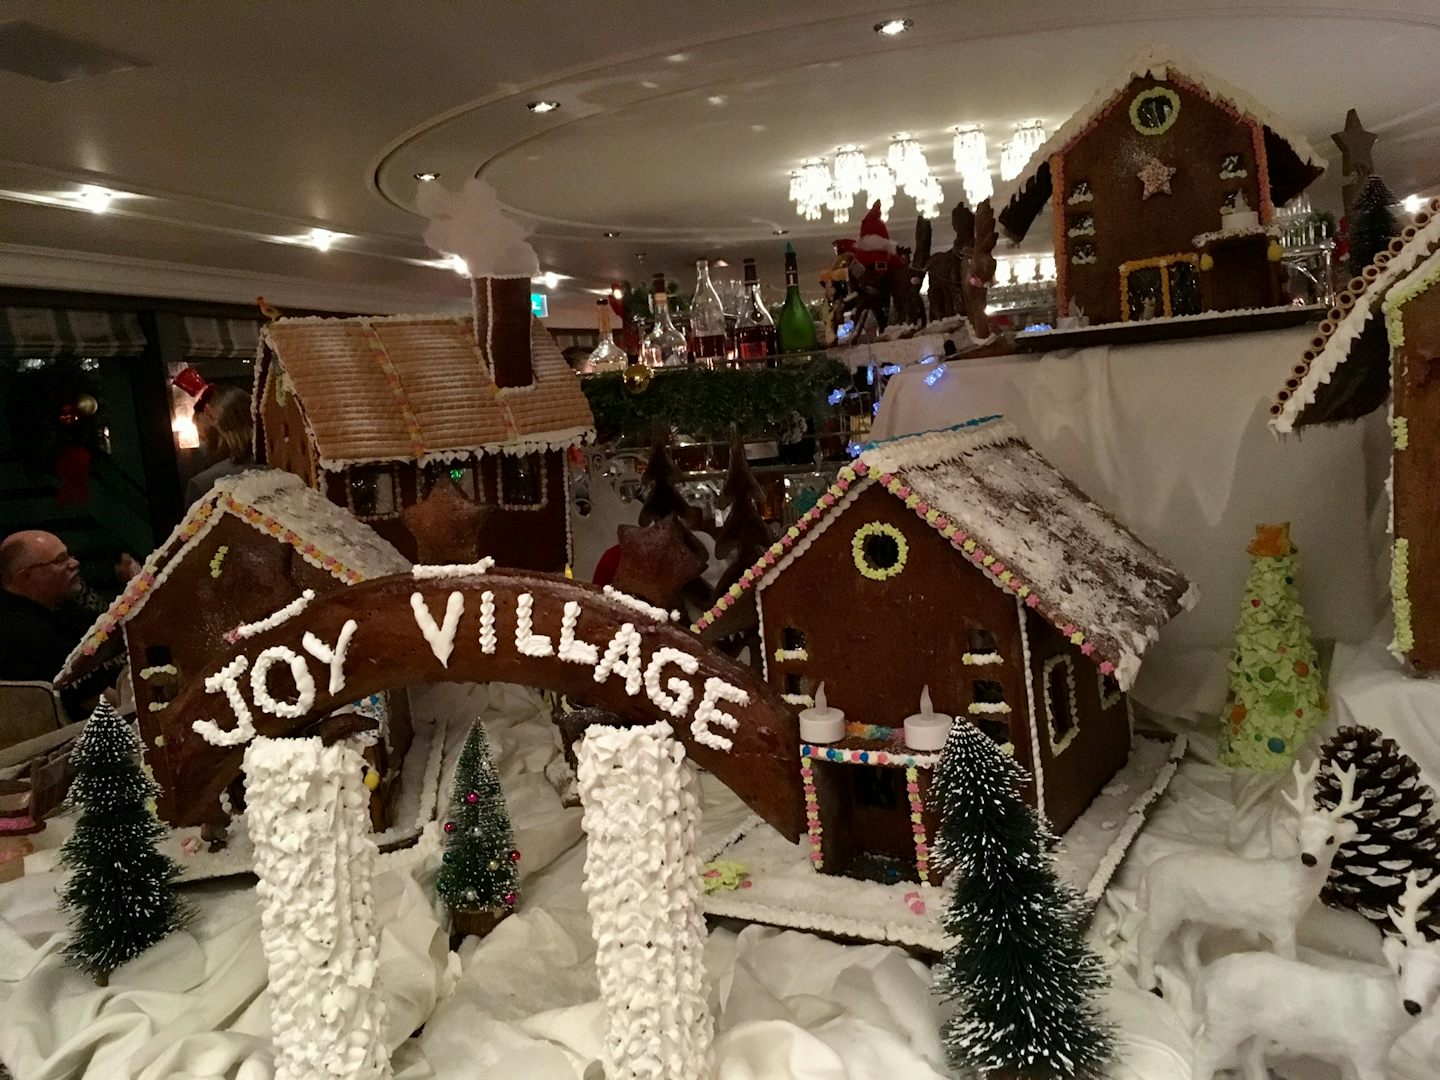 The Gingerbread Village in the Panoramio Lounge on the MS Joy